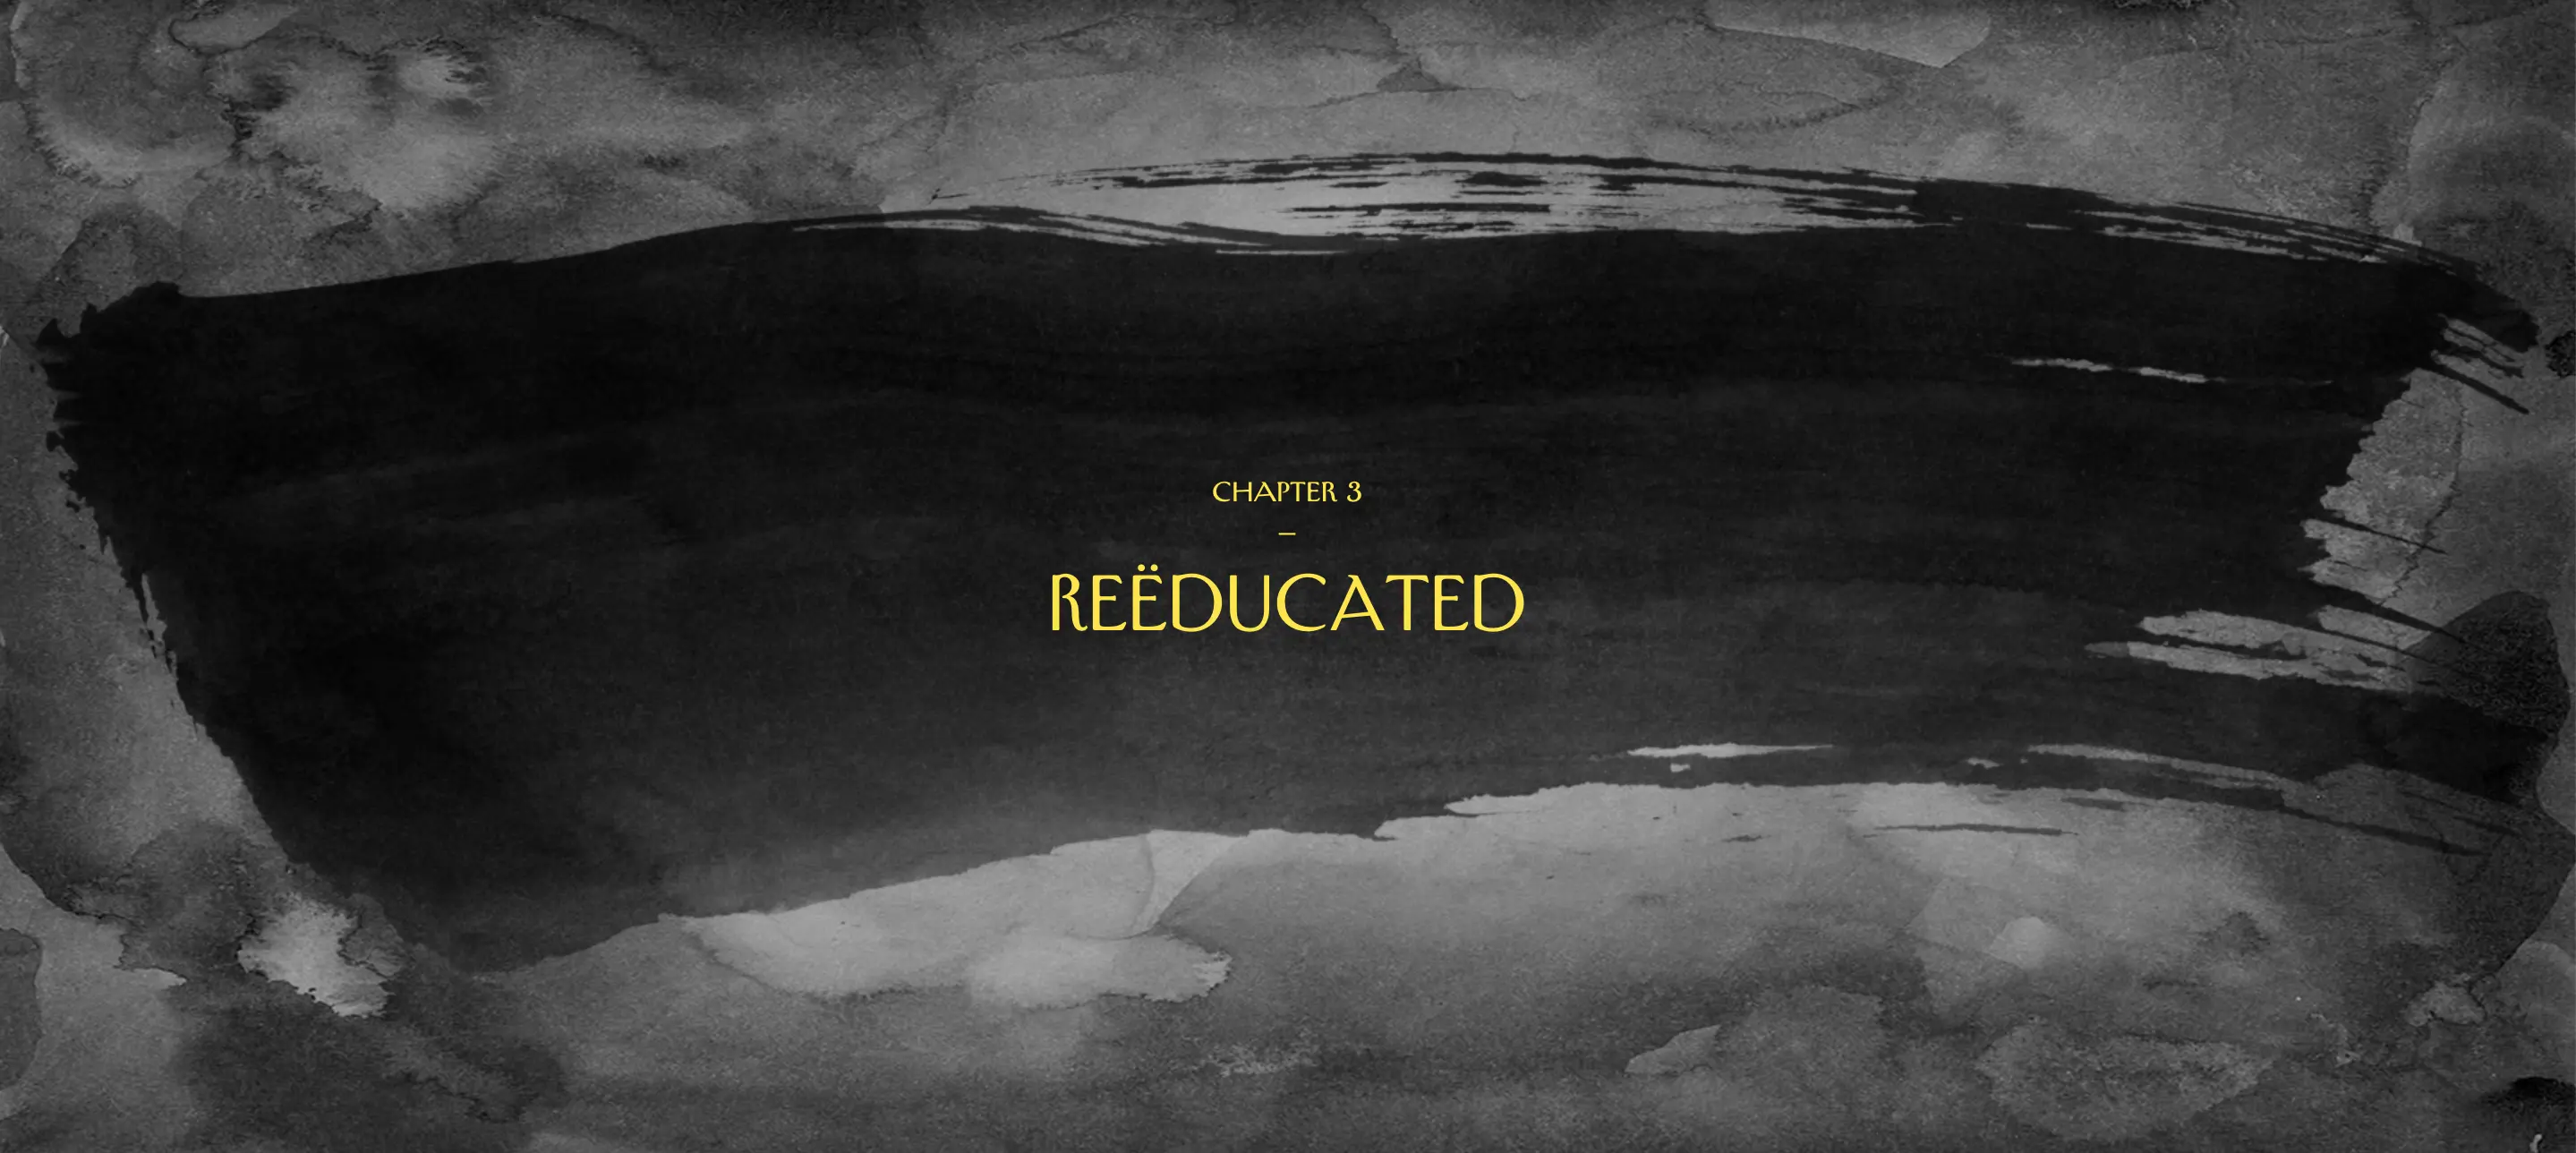 Chapter 3: Reeducated